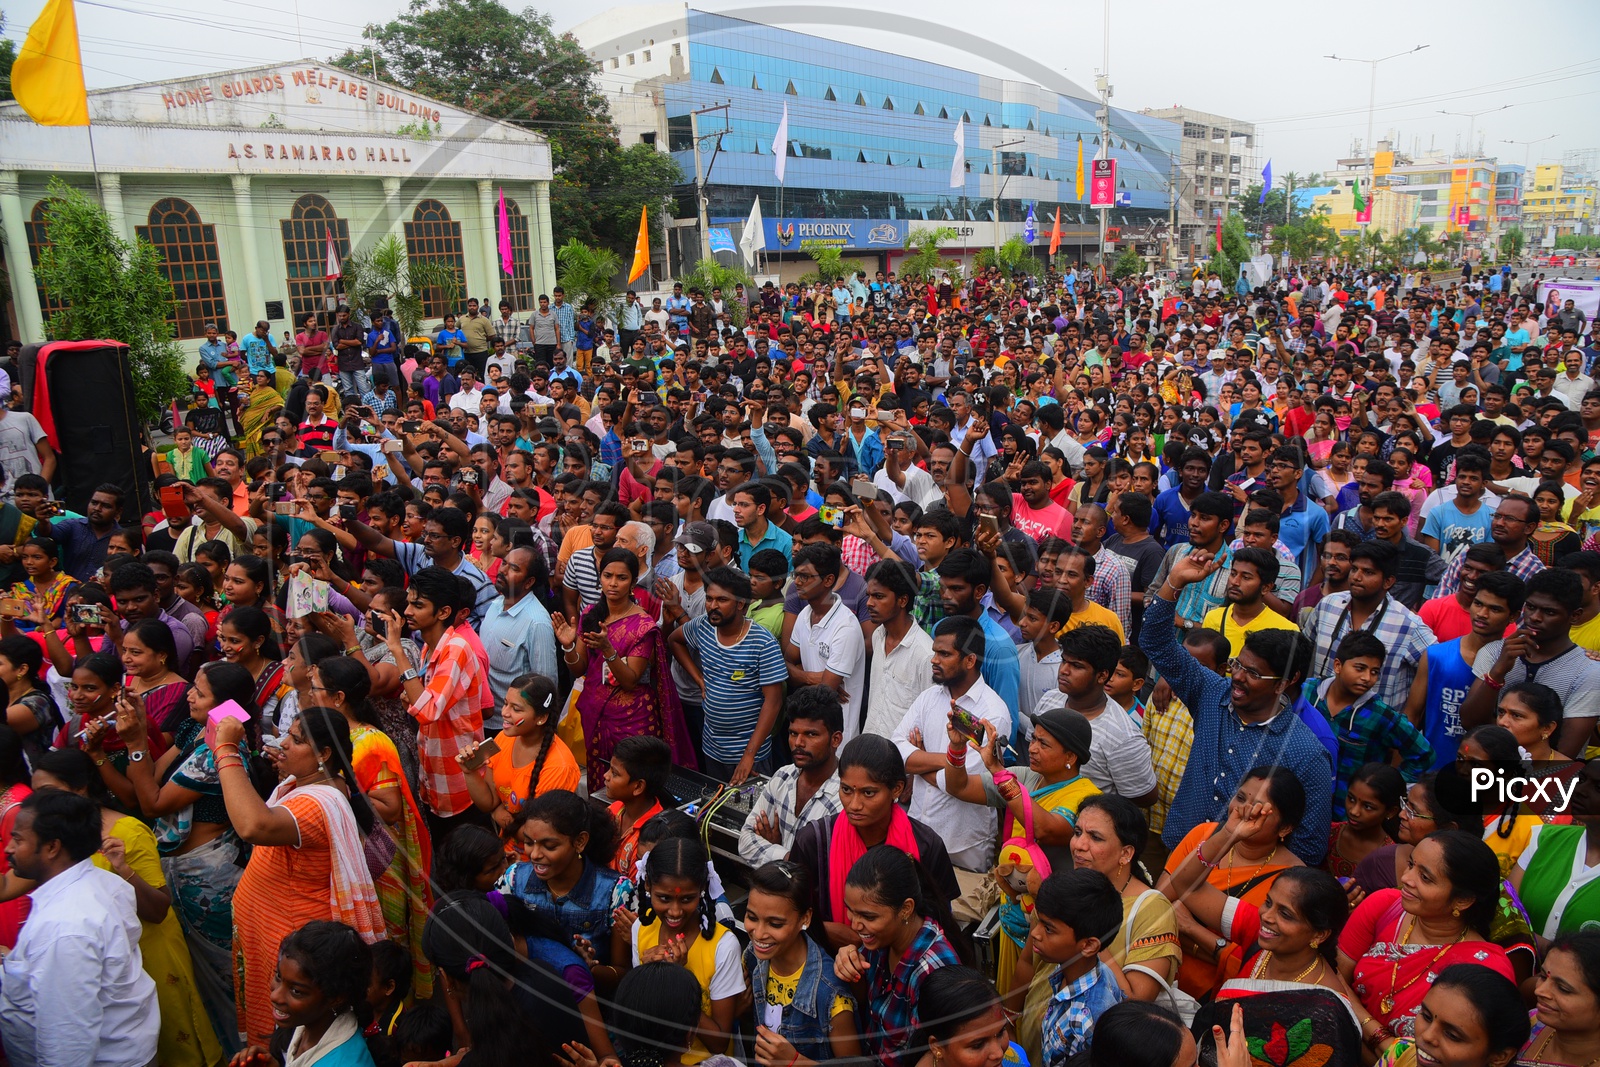 Crowd In an Event